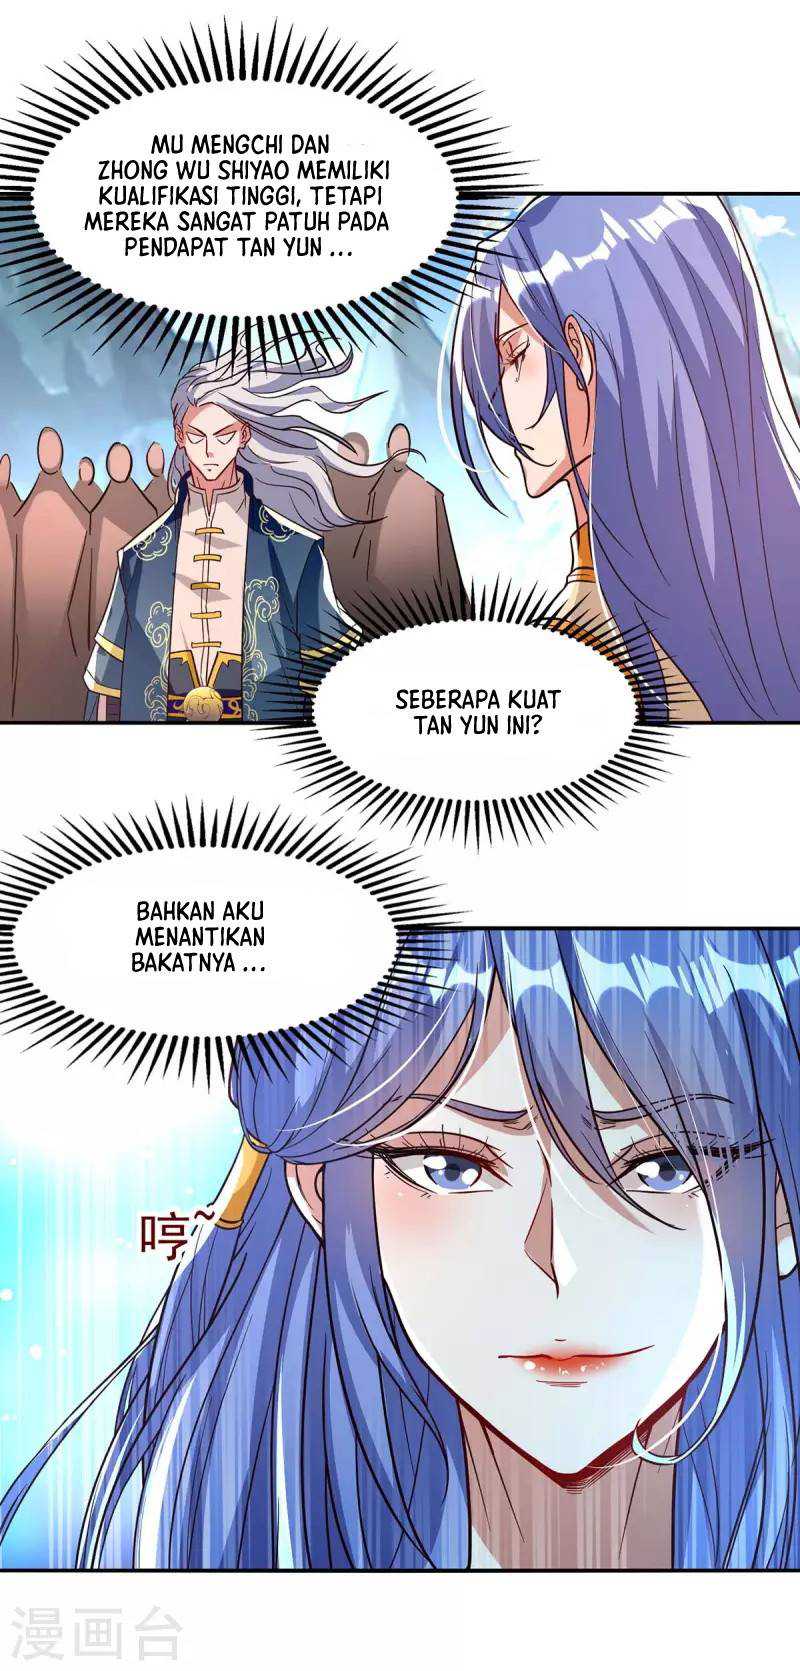 Against The Heaven Supreme (Heaven Guards) Chapter 90 - 147